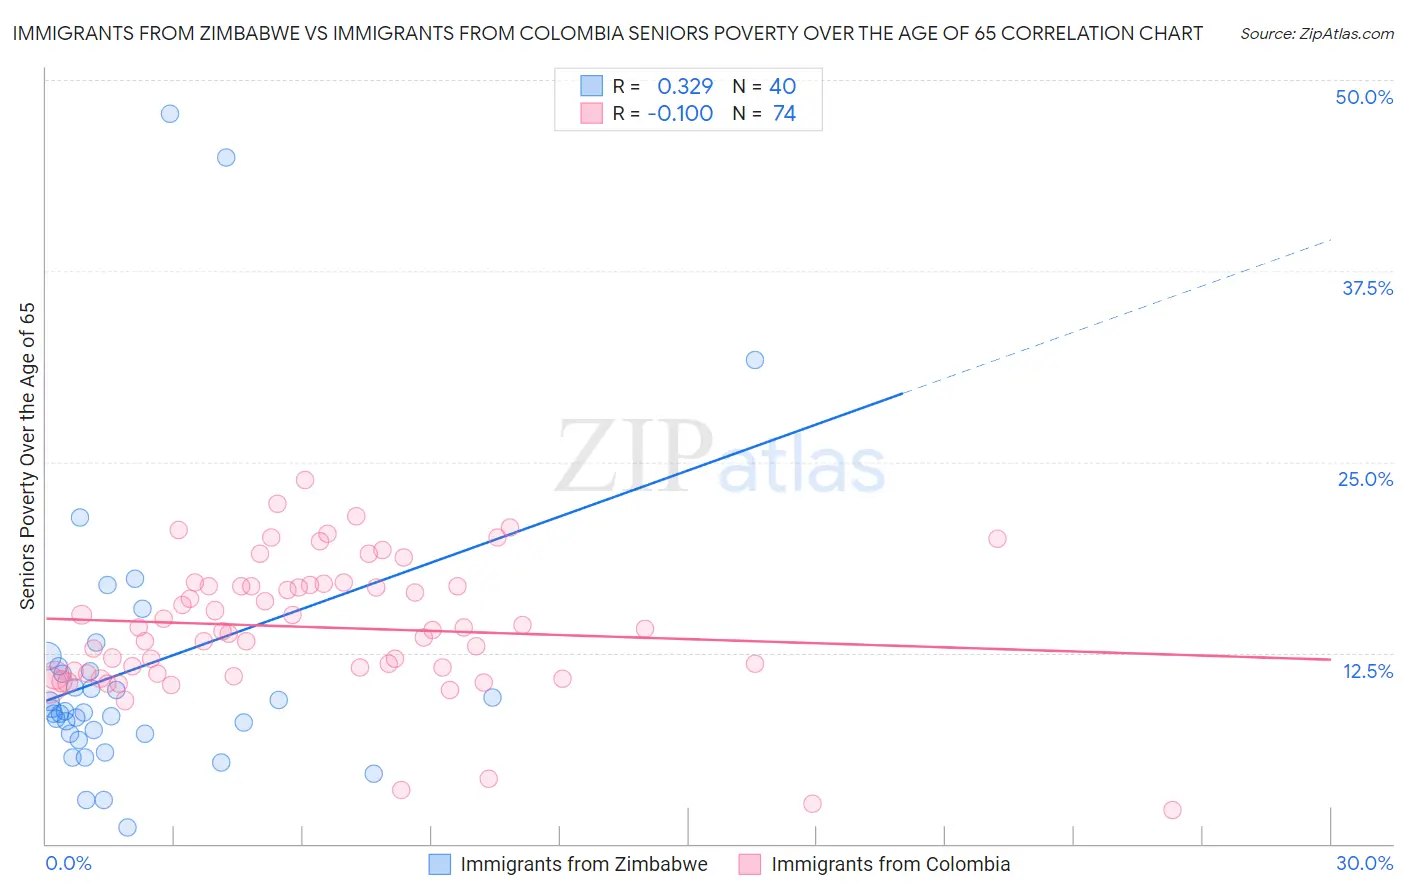 Immigrants from Zimbabwe vs Immigrants from Colombia Seniors Poverty Over the Age of 65